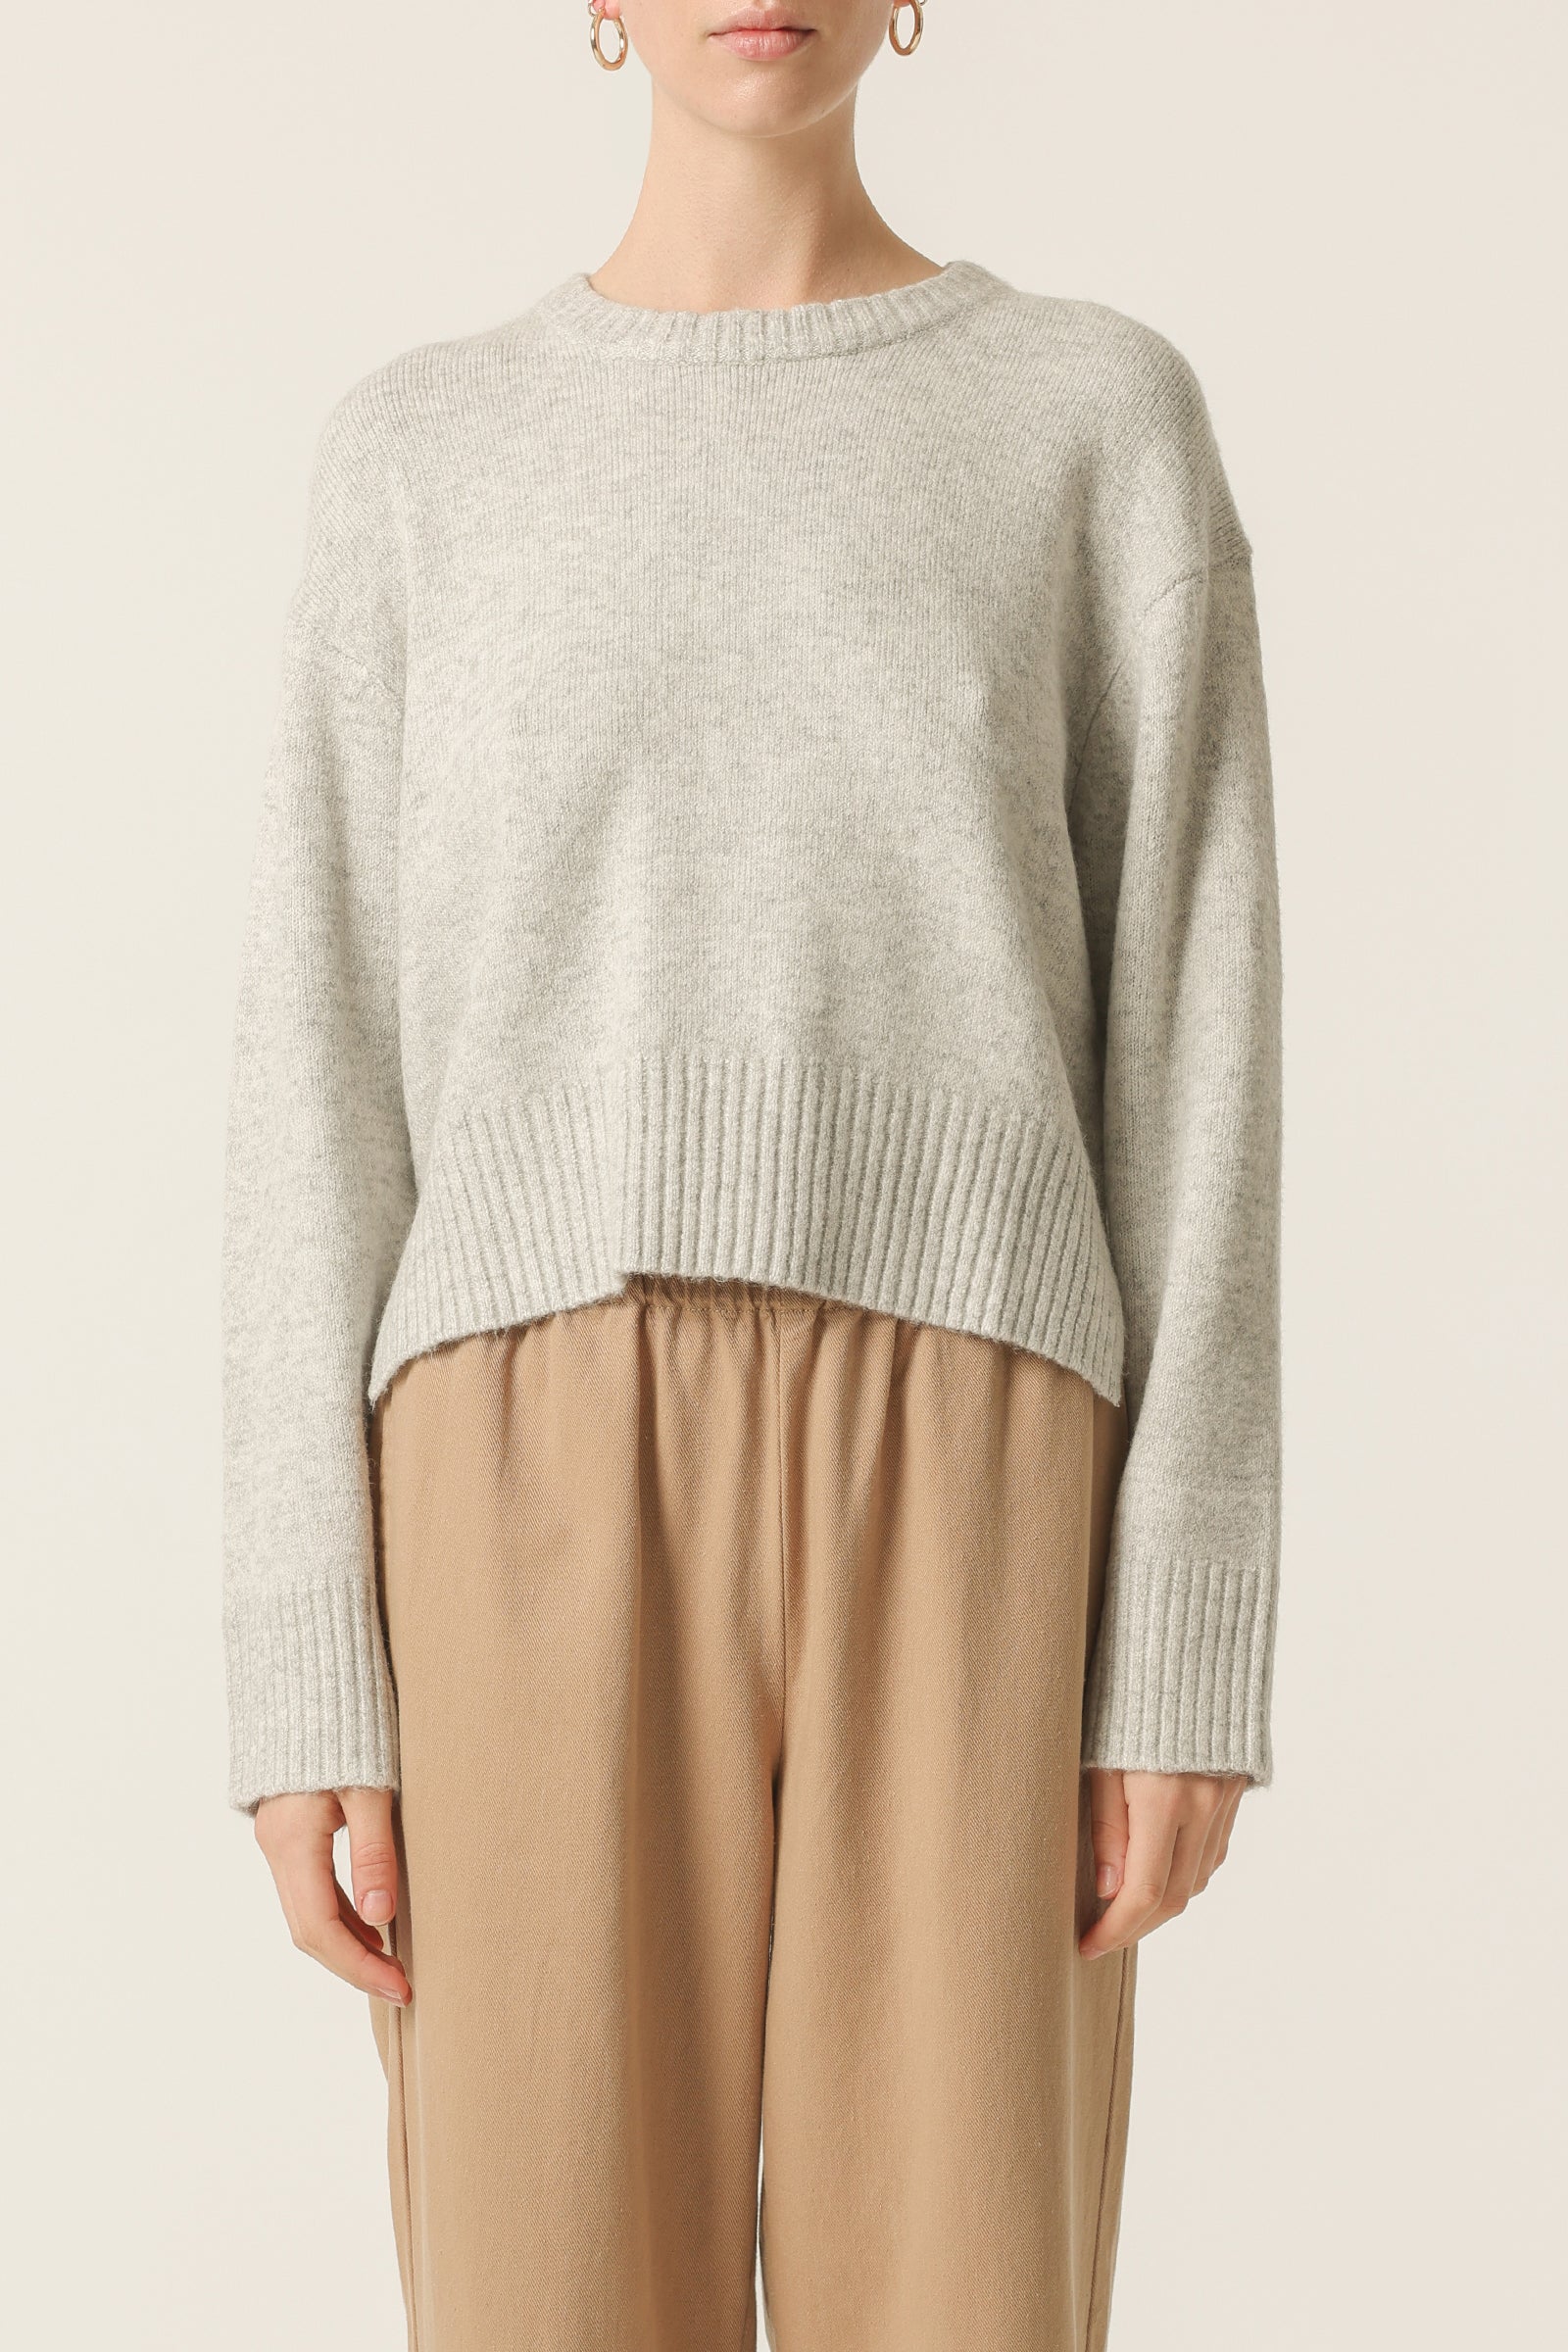 Nude Lucy Finley Knit In Grey Marle